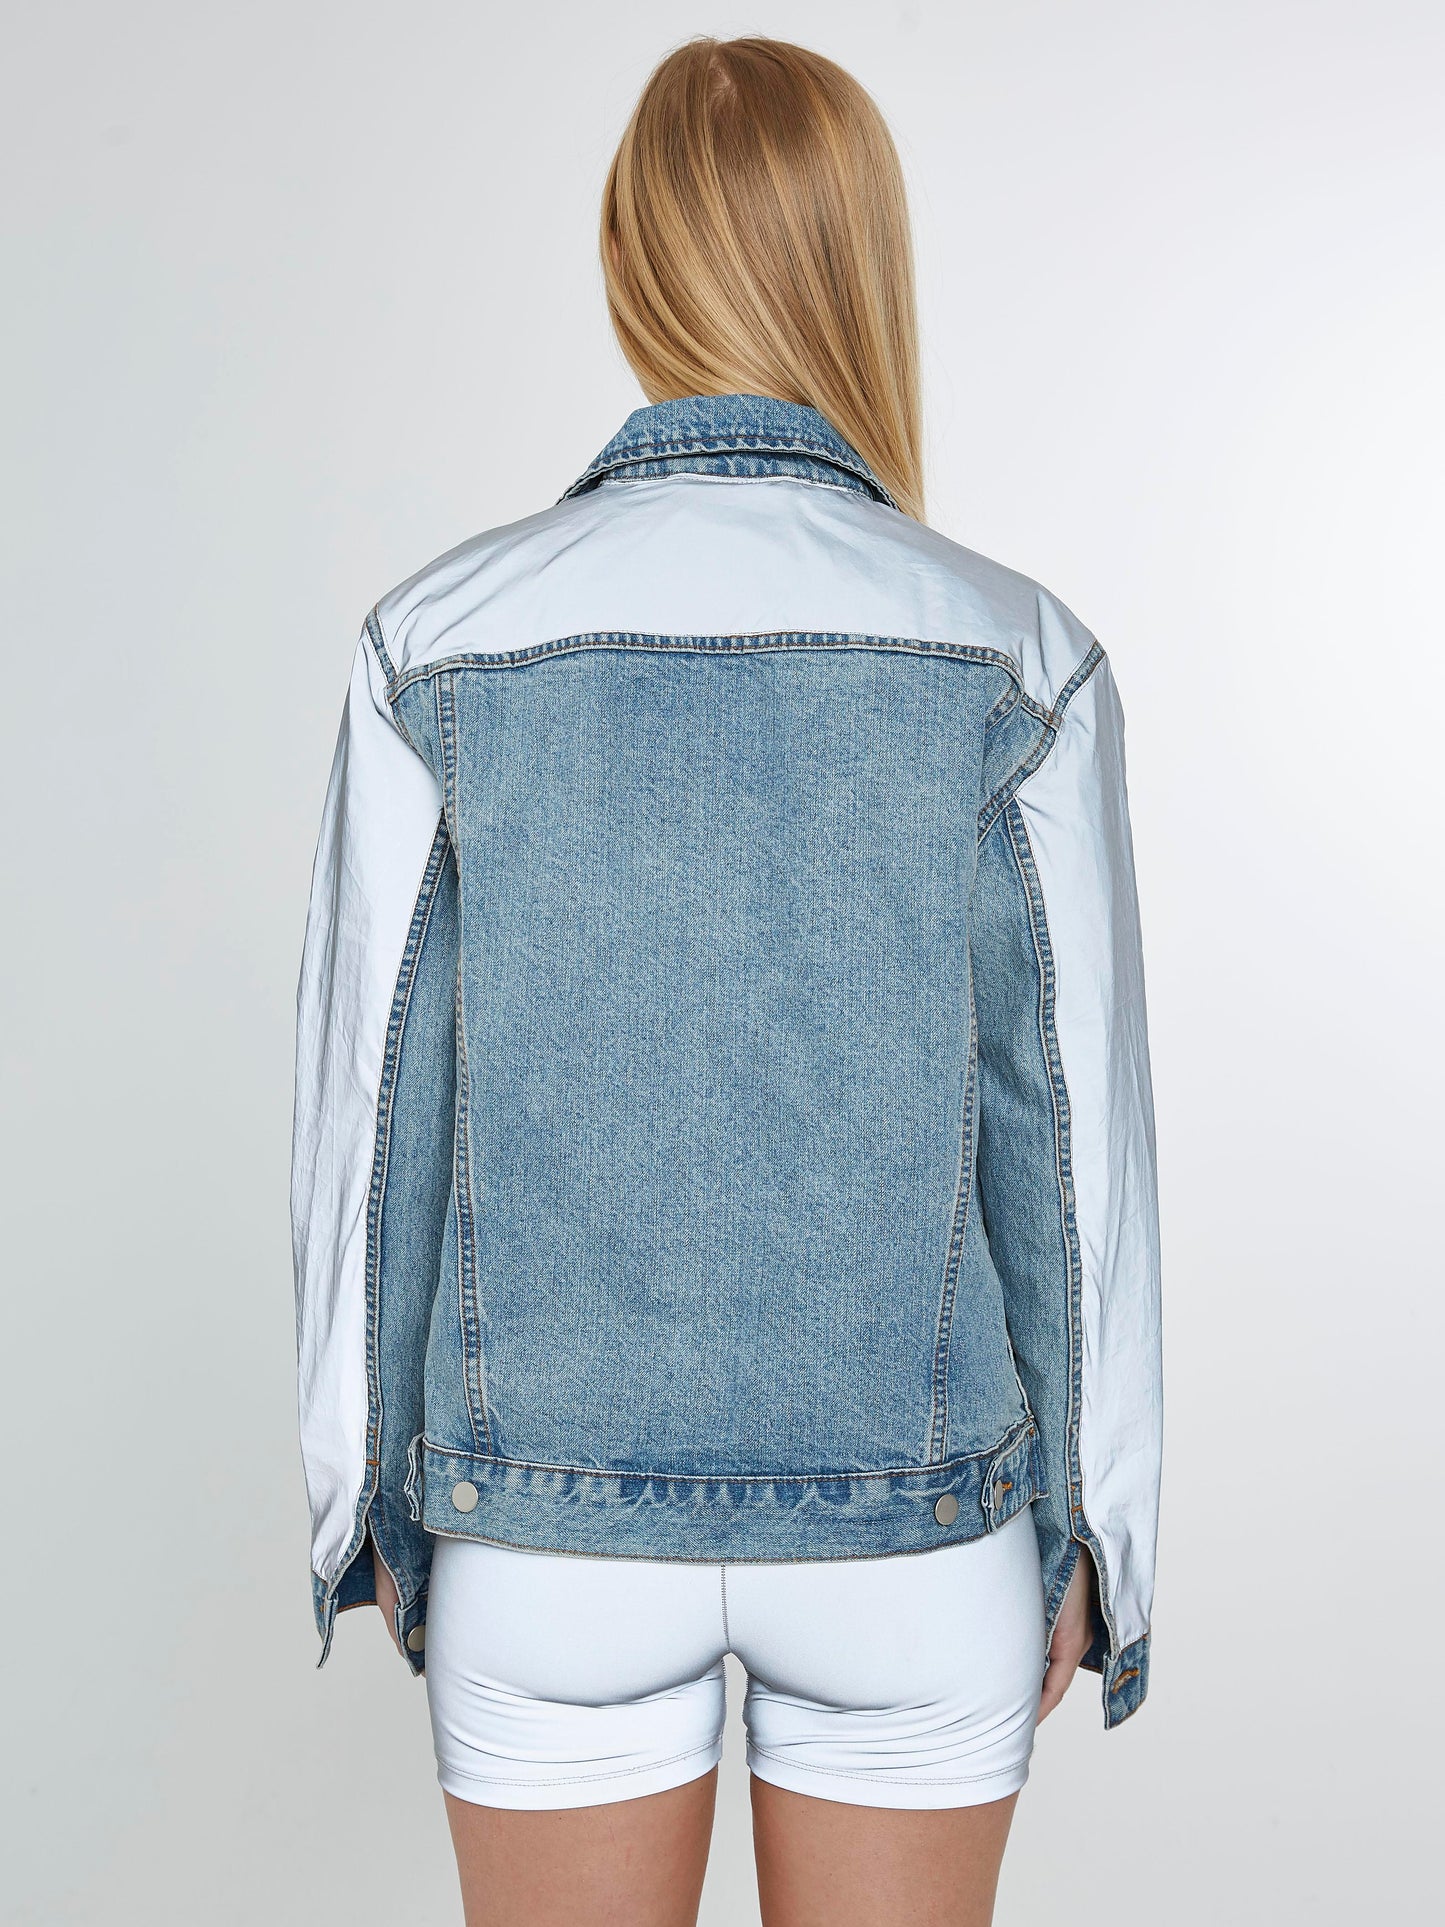 Denim Jacket with iridescent silver sleeves